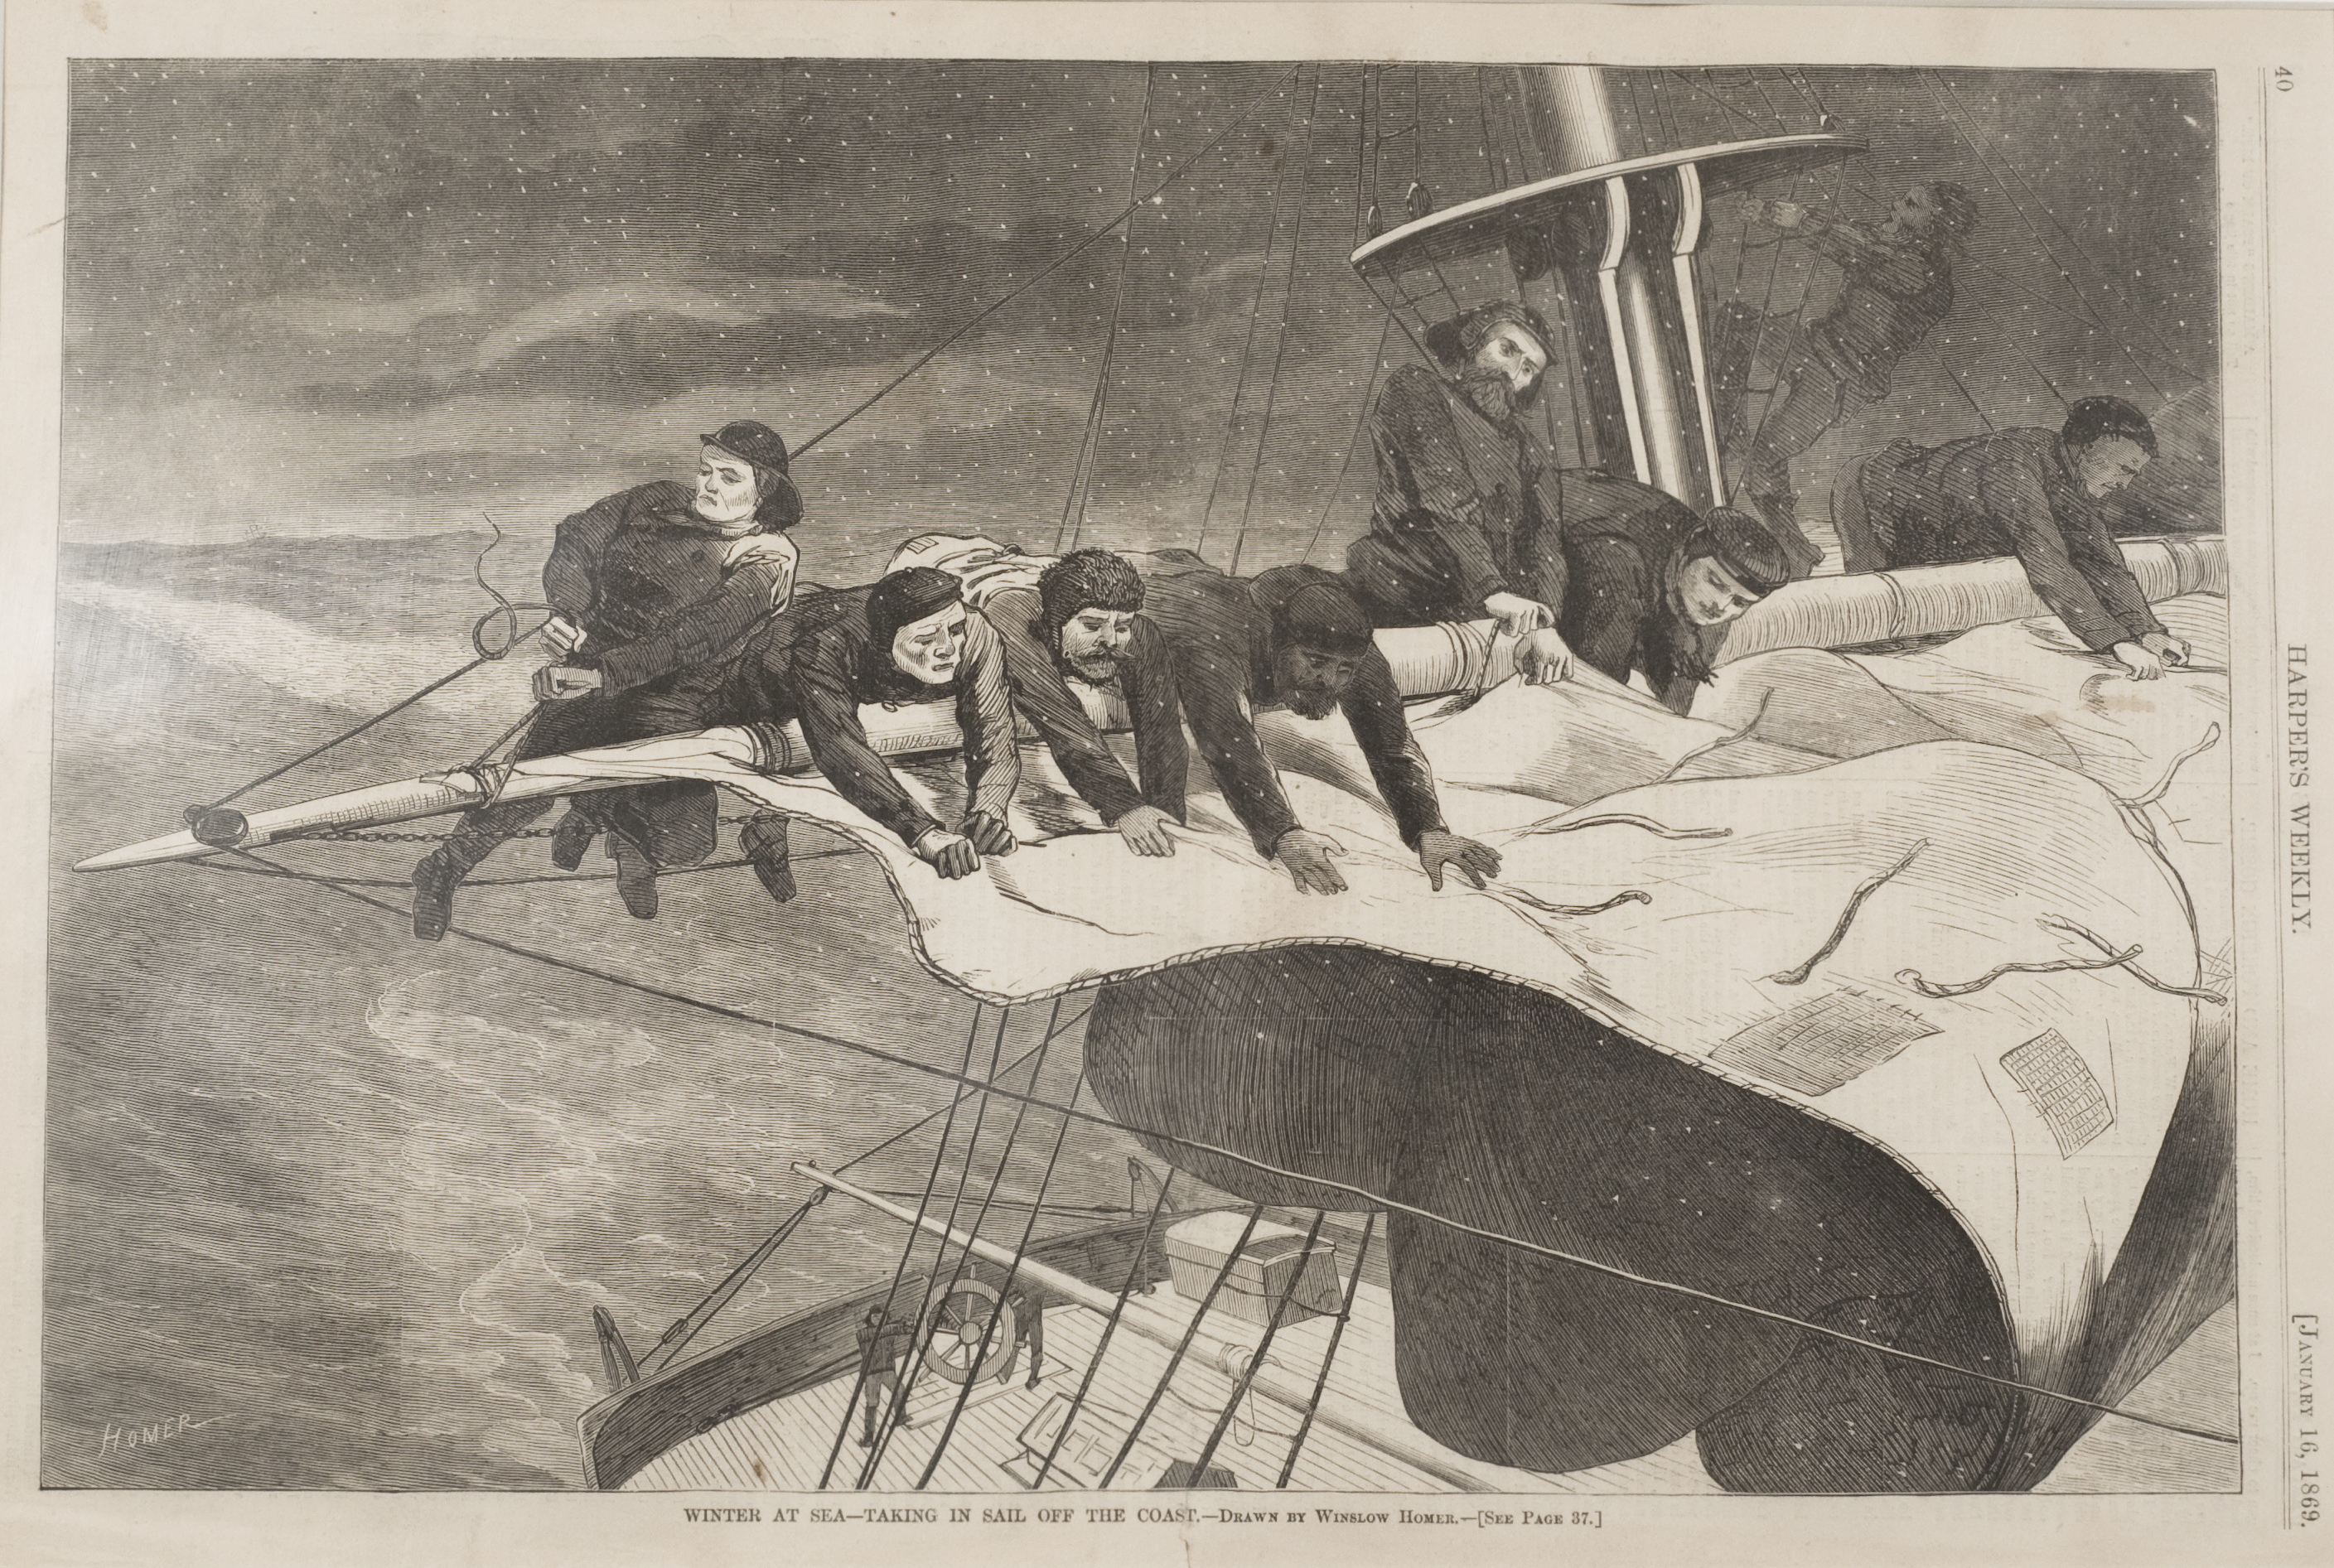 Winslow Homer, "Winter at Sea - Taking in Sail off the Coast (For Harper's Weekly, January 16, 1869)," ca. 1869, Wood engraving, 12 7/8 x 8 7/8 in., William F. Brooks Fund